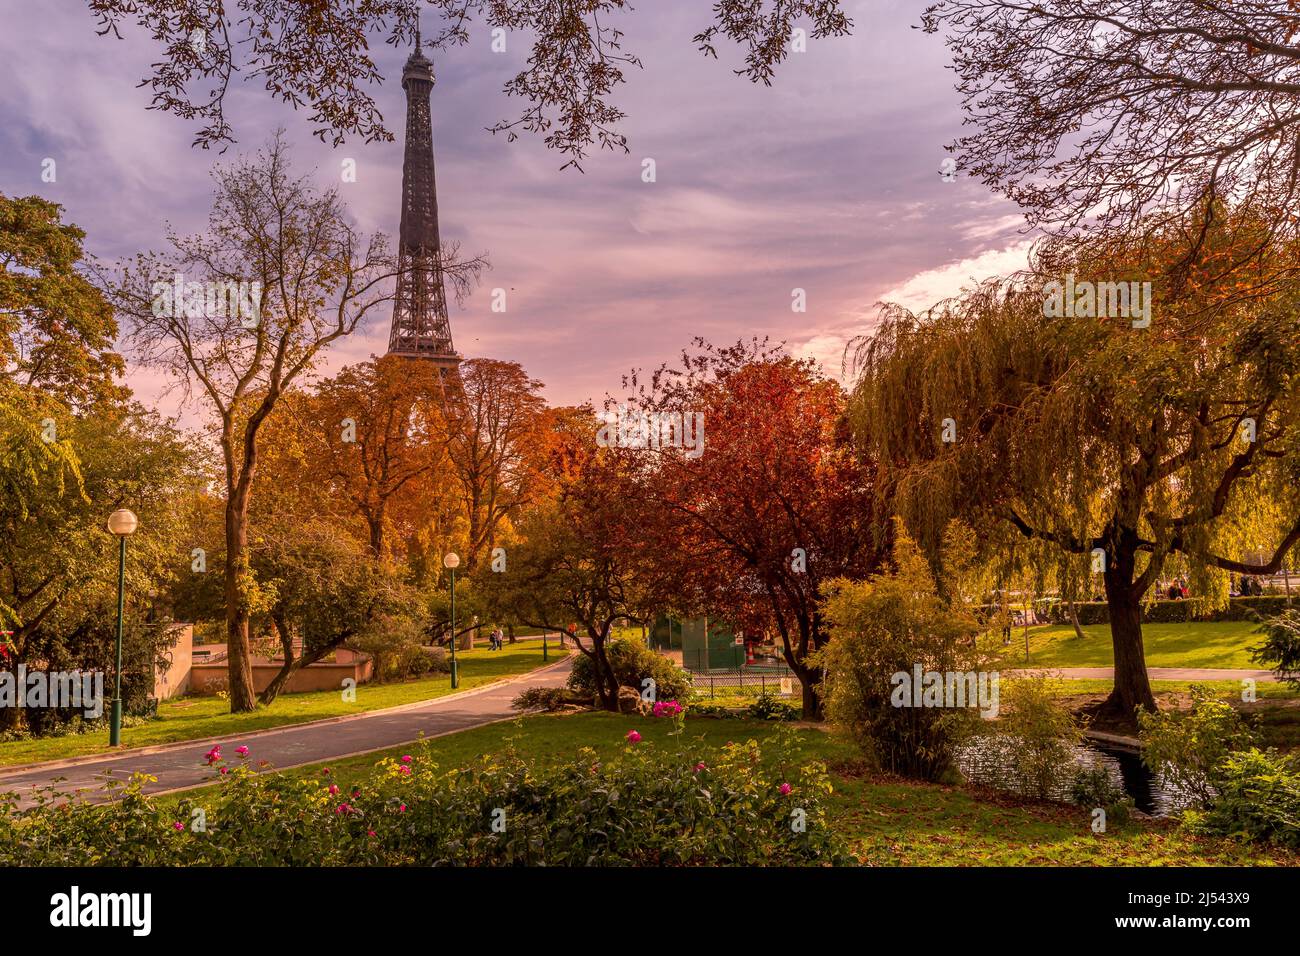 Paris, France - October 19, 2020: Beautiful Autumn colors in Trocadero Park with Eiffel Tower in background Stock Photo